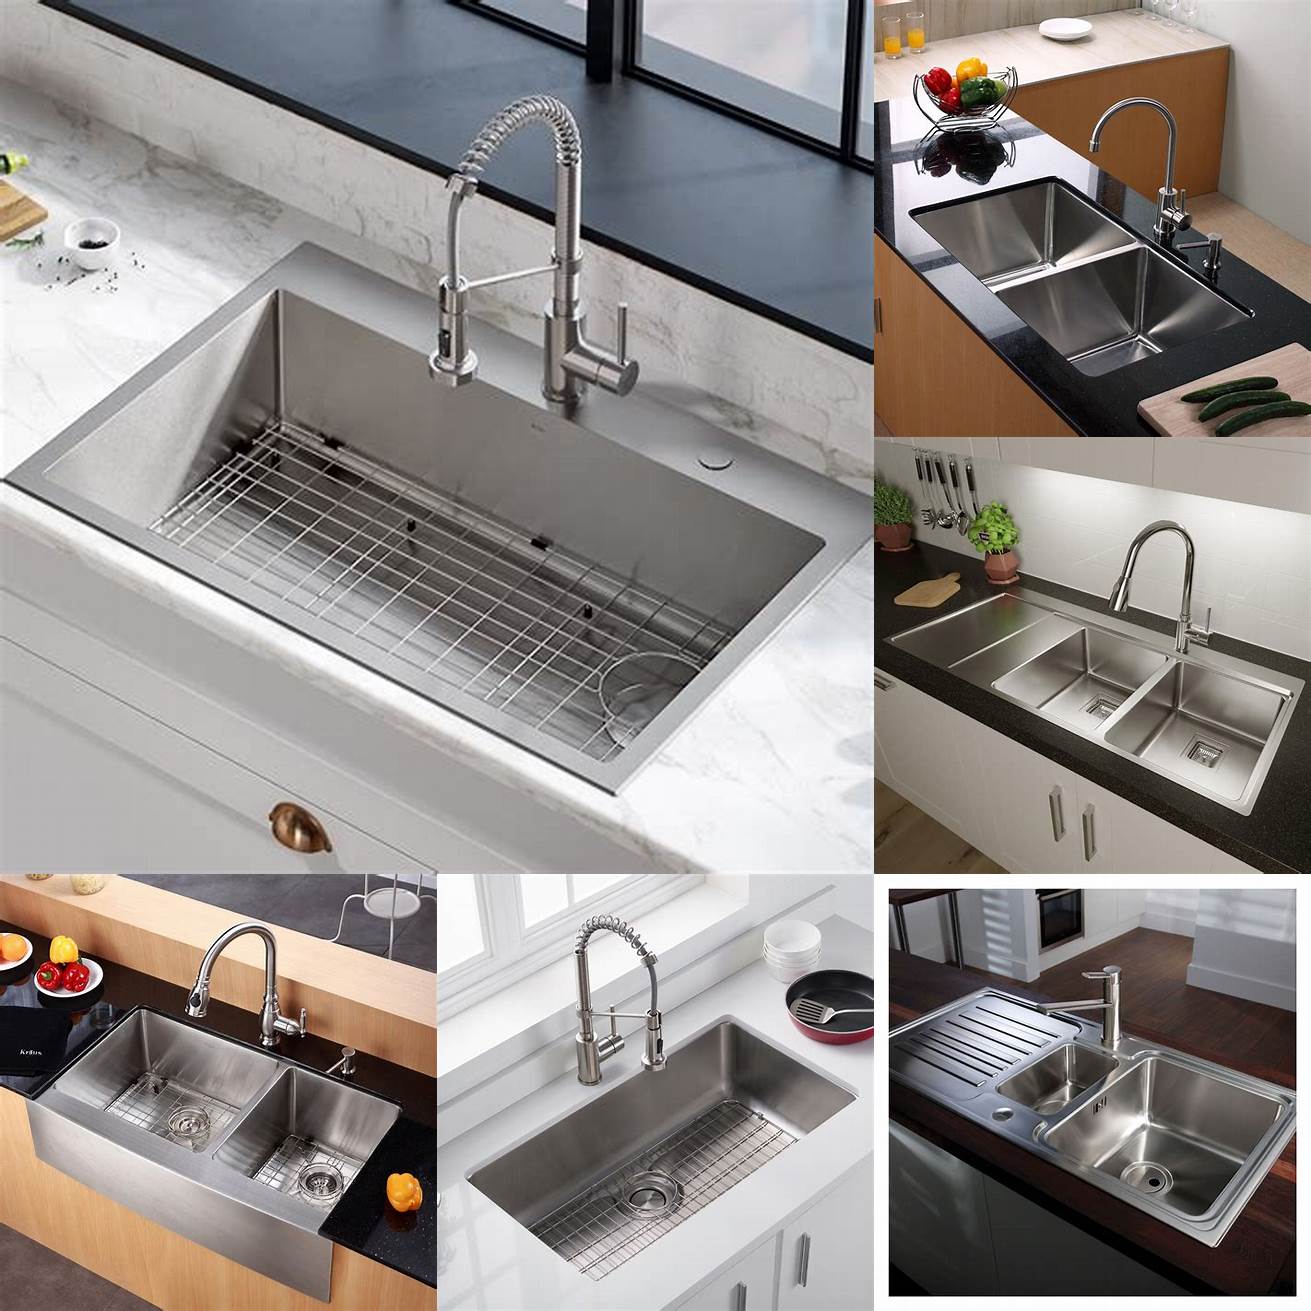 Noisier Stainless steel sinks can be noisier than other sink materials when water hits the bottom of the sink This can be remedied by adding sound-absorbing pads or mats to the sinks underside